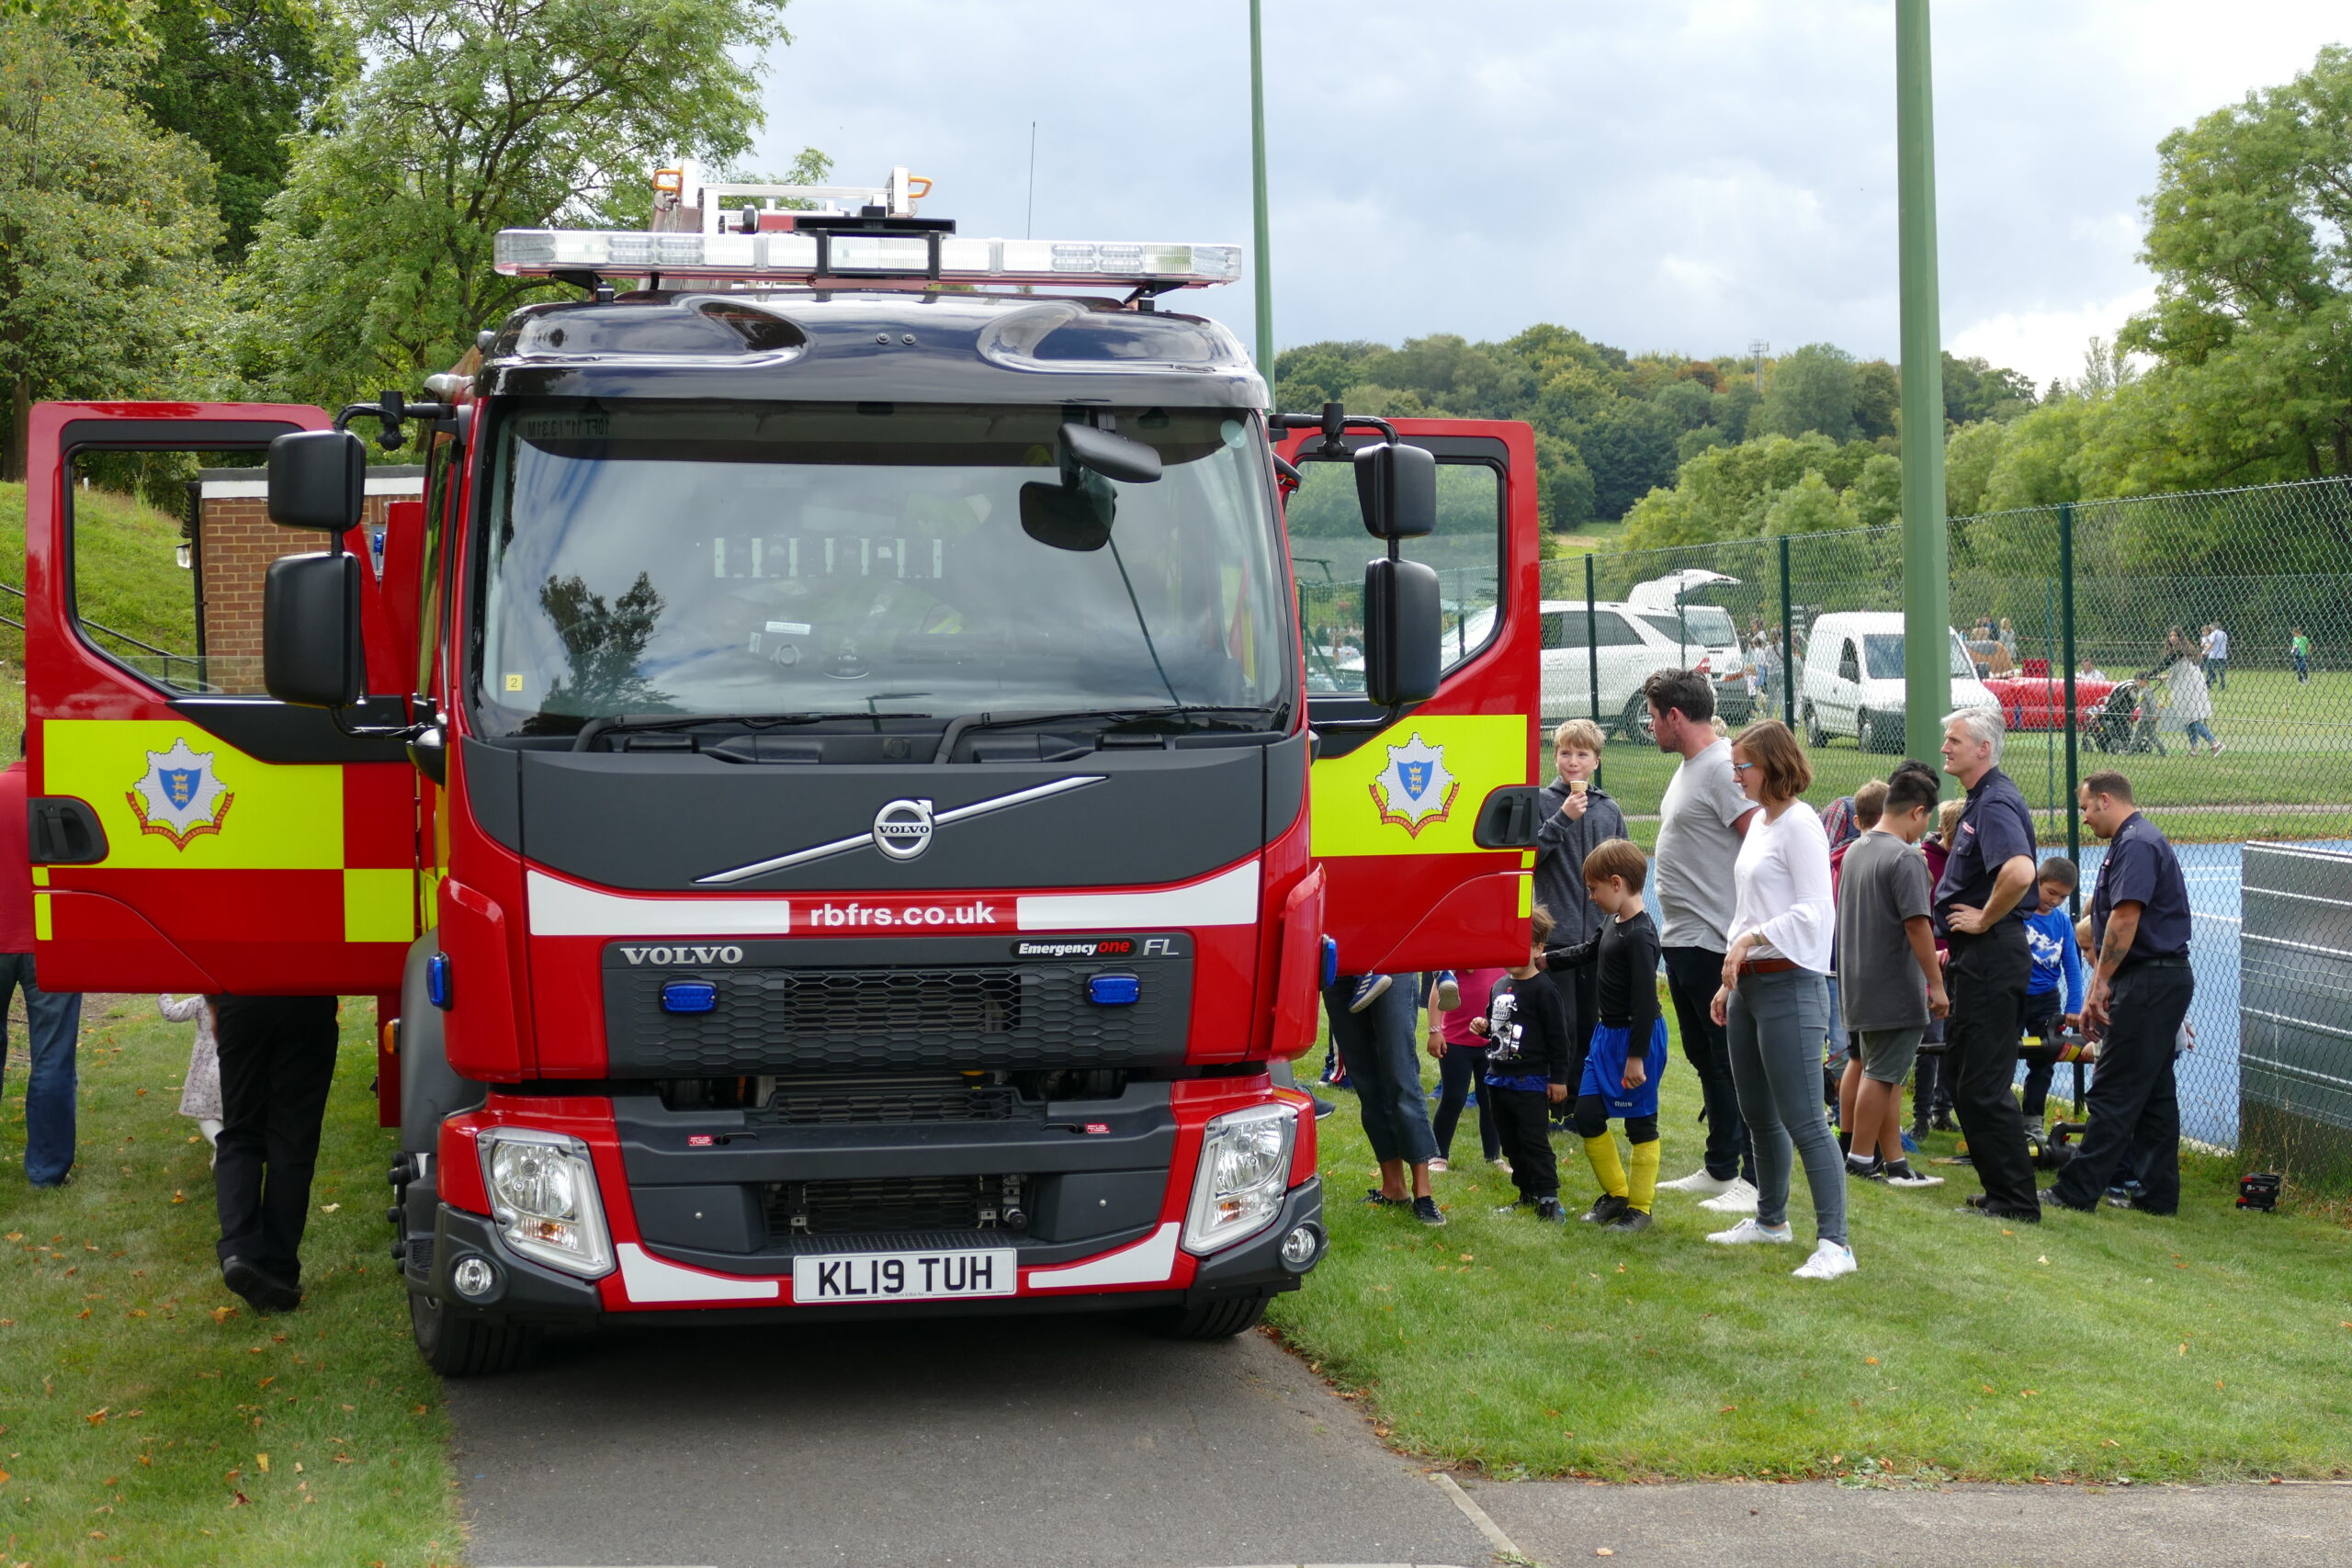 The Maidenhead Fire Brigade showcasing their state-of-the-art fire engine at the St John's Beaumont Dog Show 2019